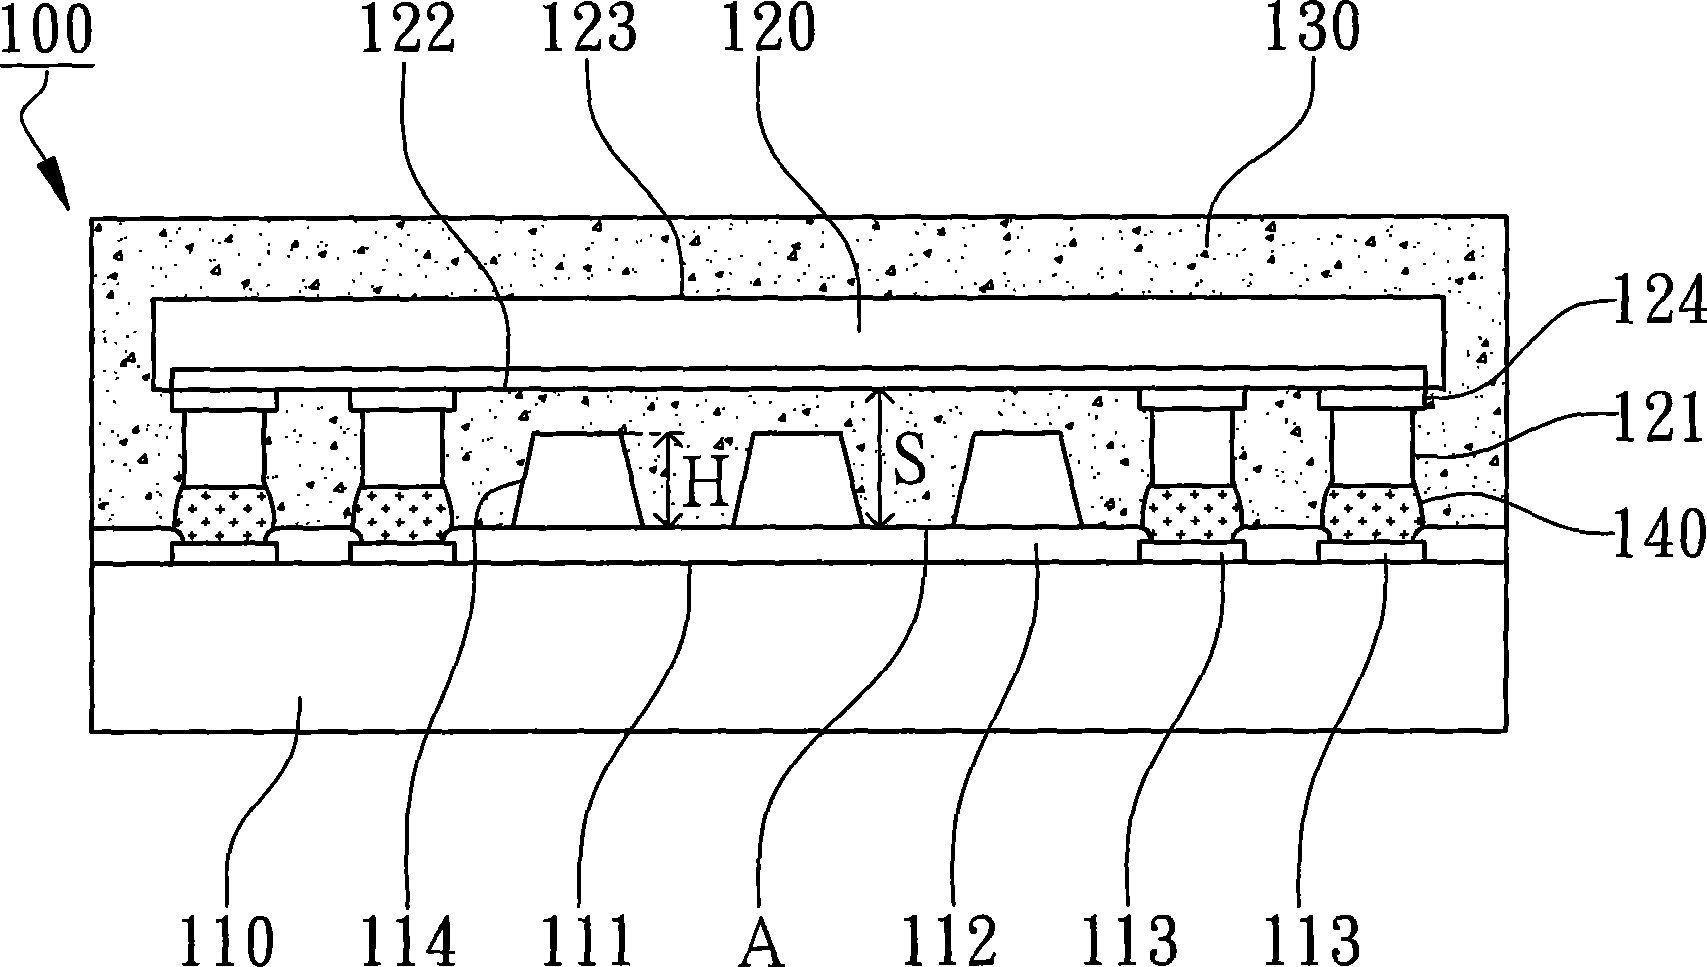 Structure and method of flip chip encapsulation of non-array bumps